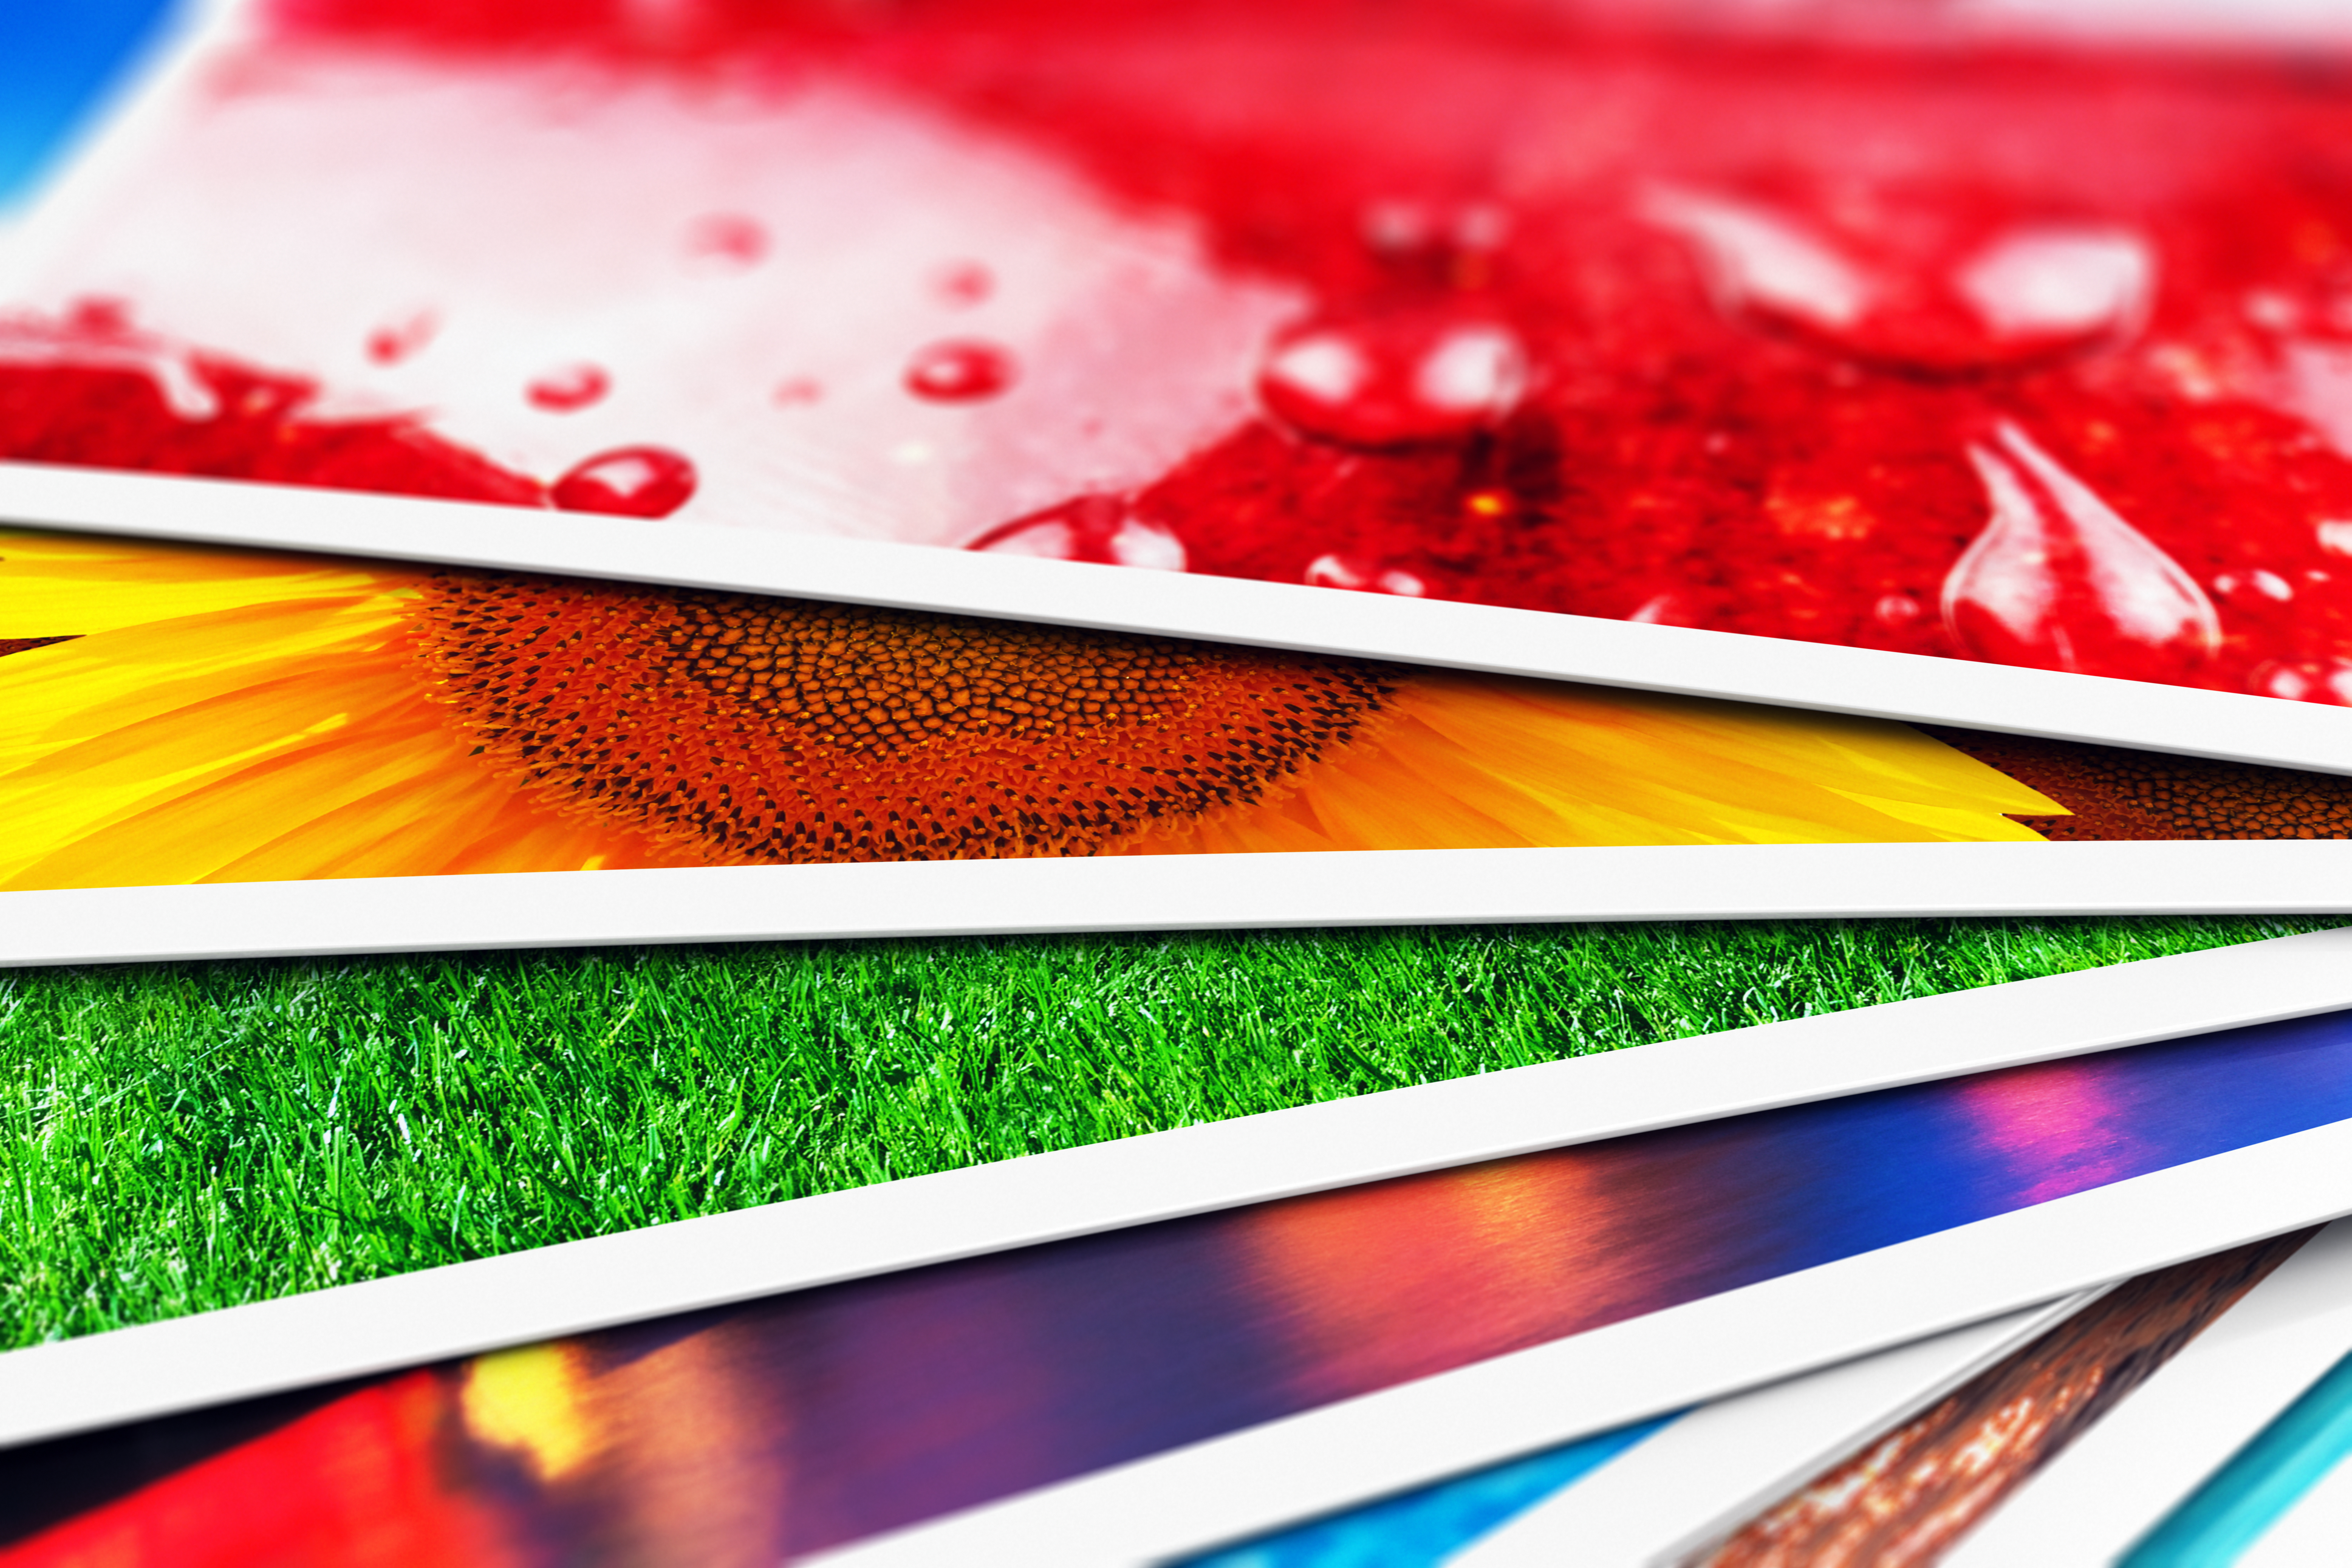 An image of several photos with vibrant colors.